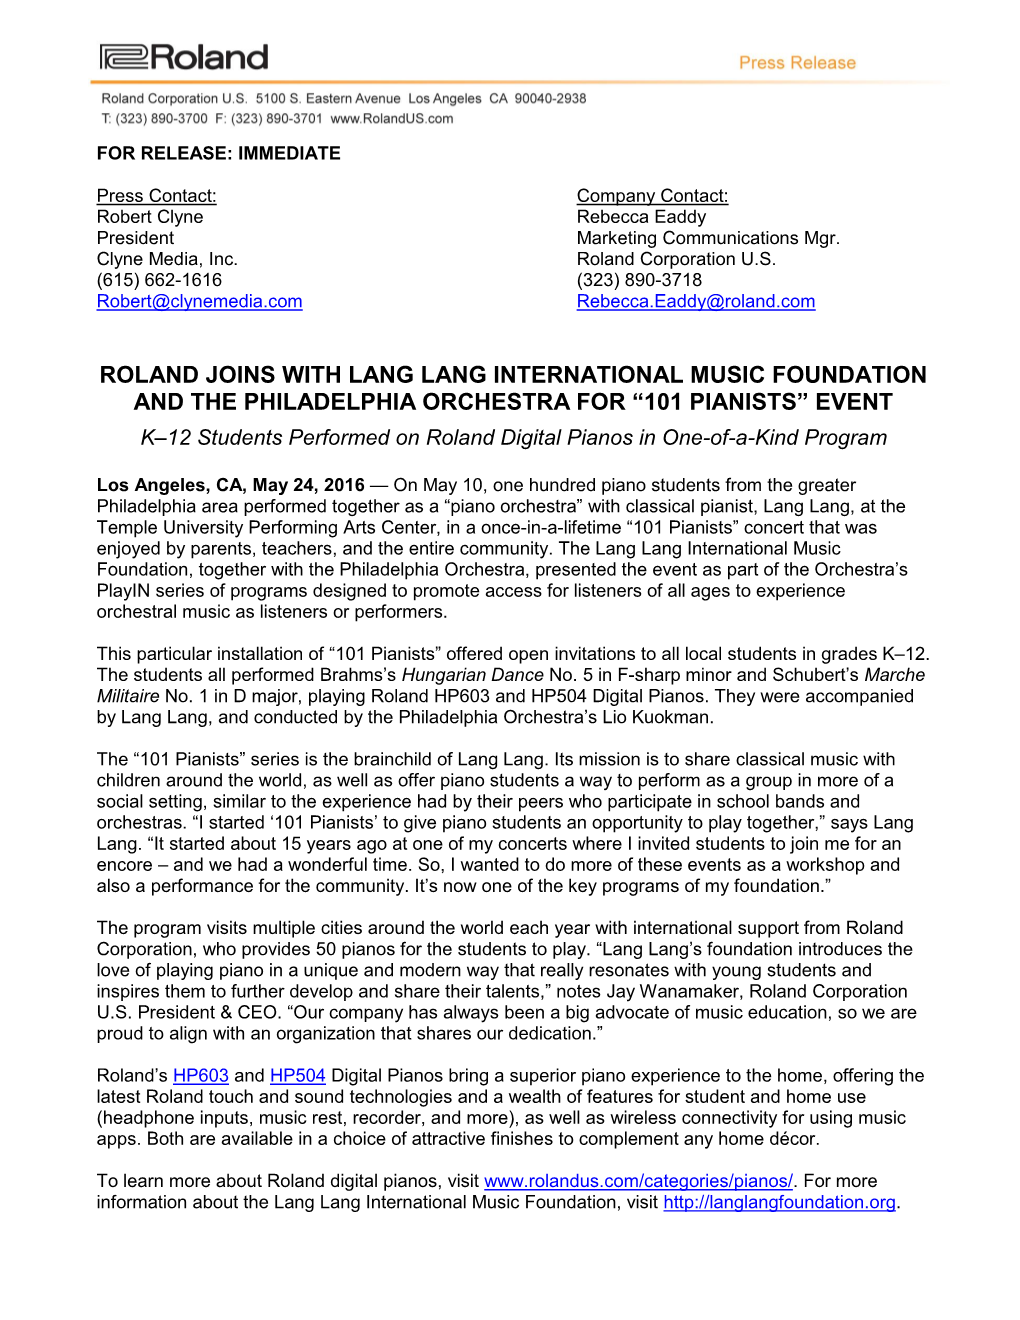 Roland Joins with Lang Lang International Music Foundation and the Philadelphia Orchestra for “101 Pianists” Event